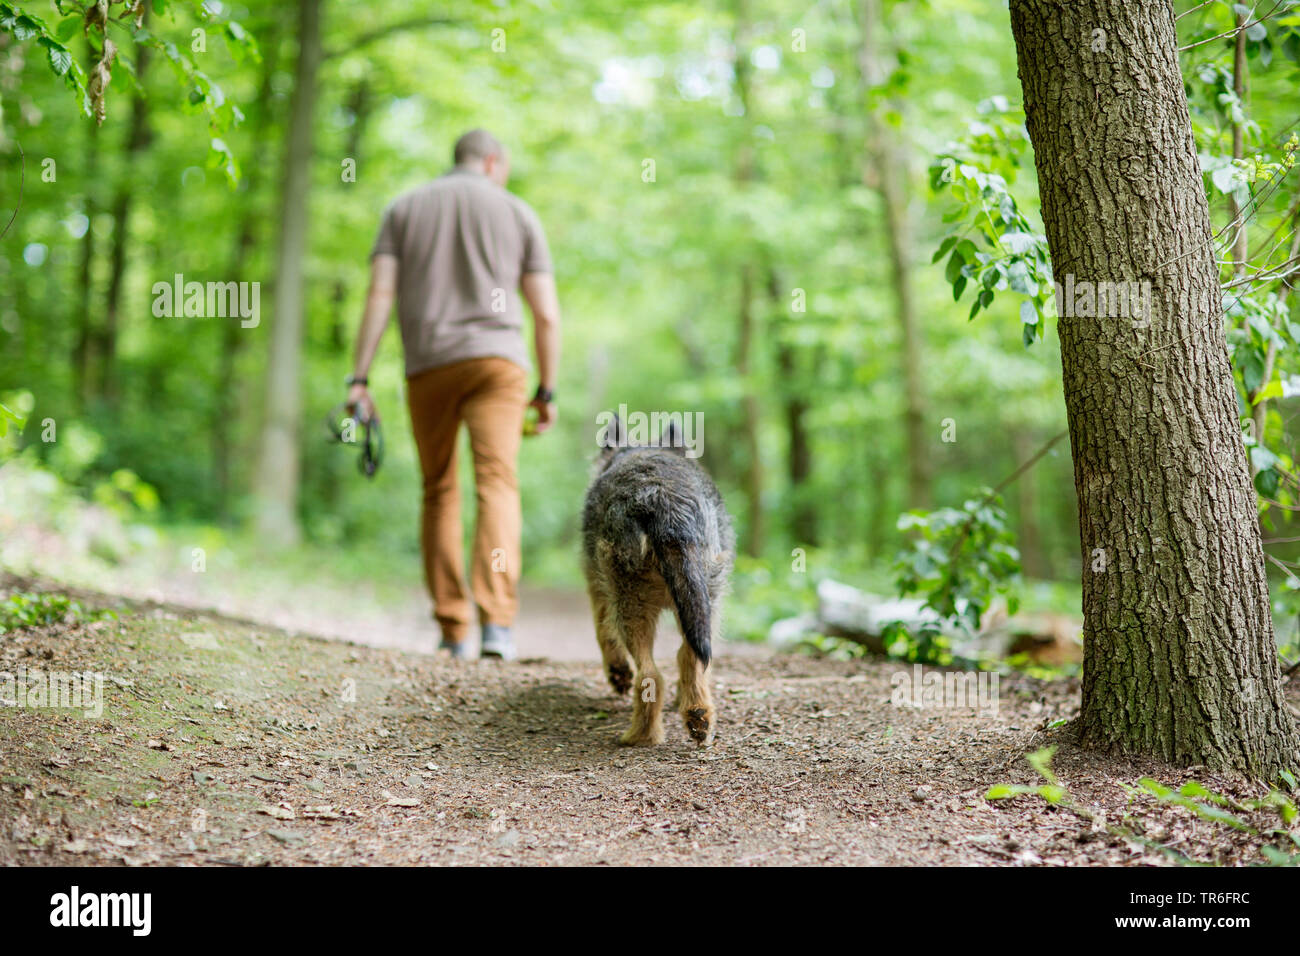 Berger de Picardie, Berger Picard (Canis lupus f. familiaris), man and dog walking in a forest, Germany Stock Photo